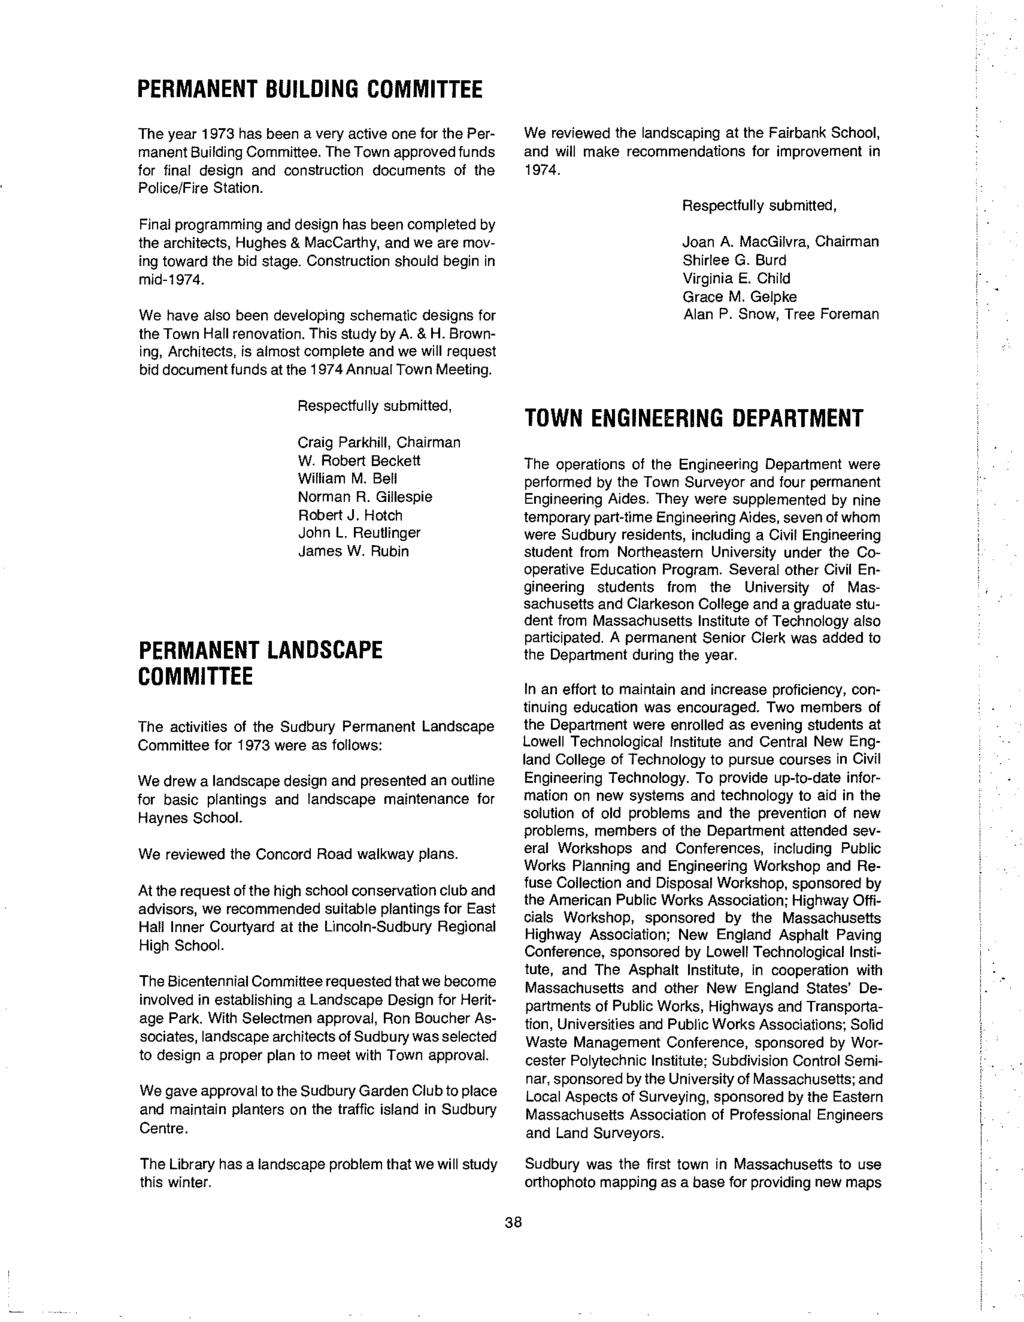 PERMANENT BUILDING COMMITTEE The year 1973 has been a very active one for the Permanent Building Committee.